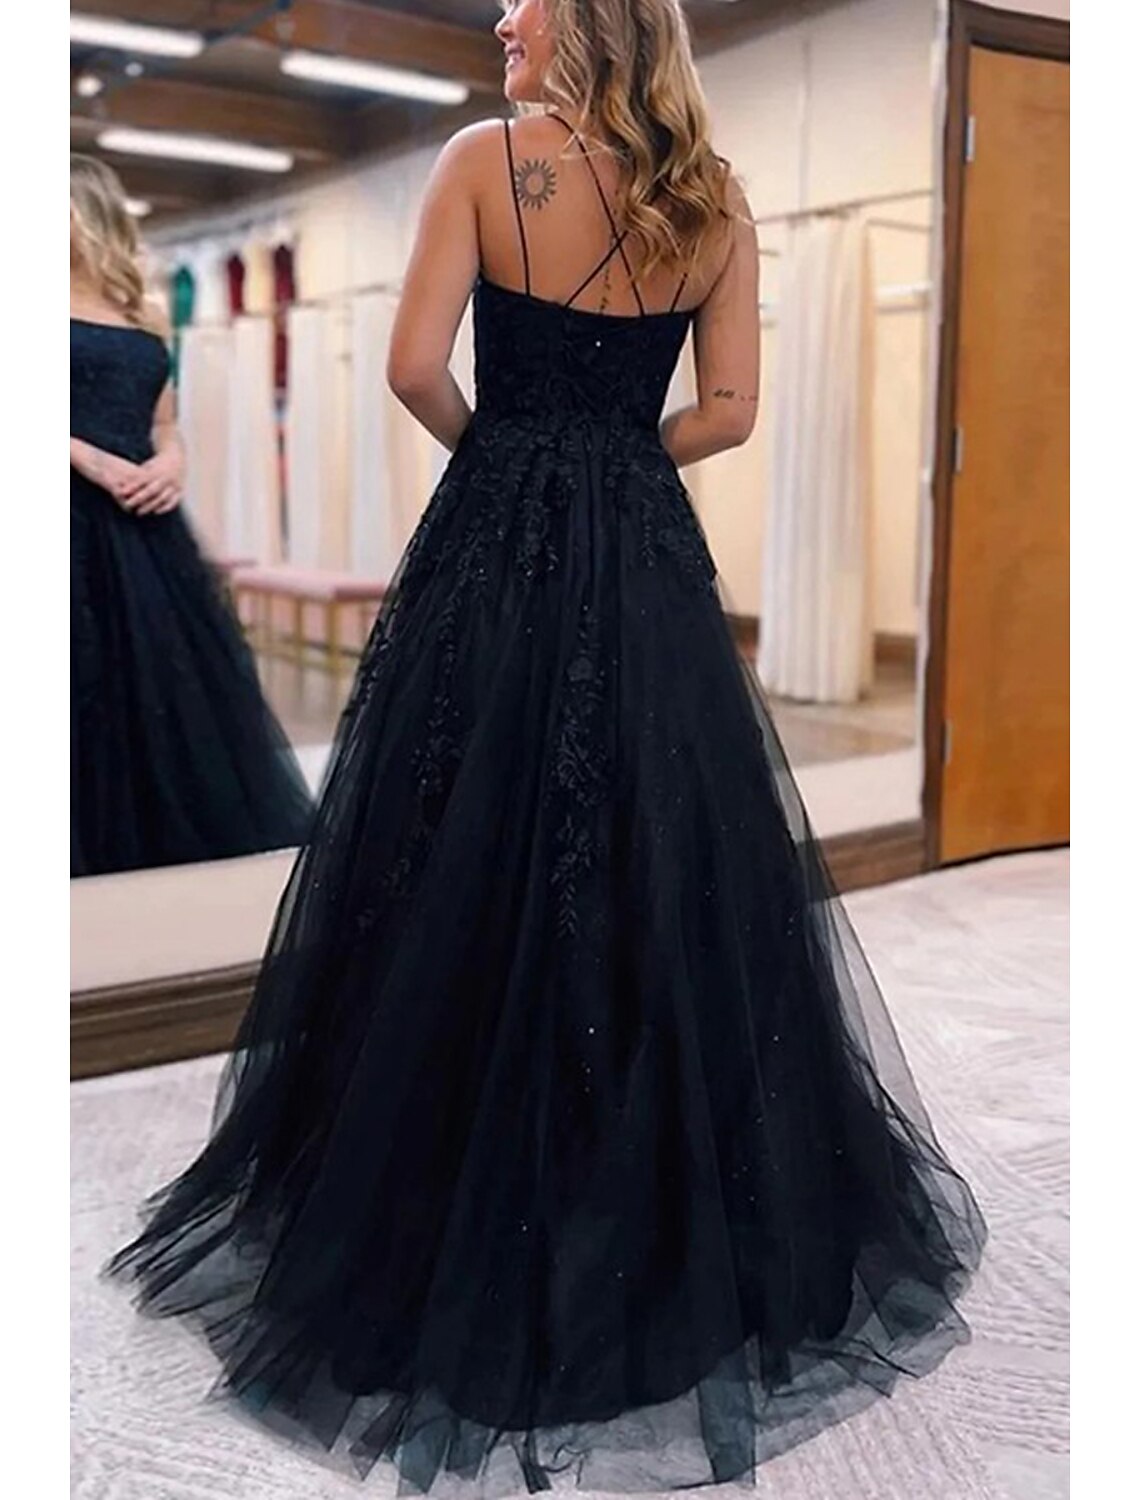 Ball Gown Prom Dresses Princess Dress Formal Wedding Party Sweep / Brush Train Sleeveless Spaghetti Strap Tulle with Pleats Appliques